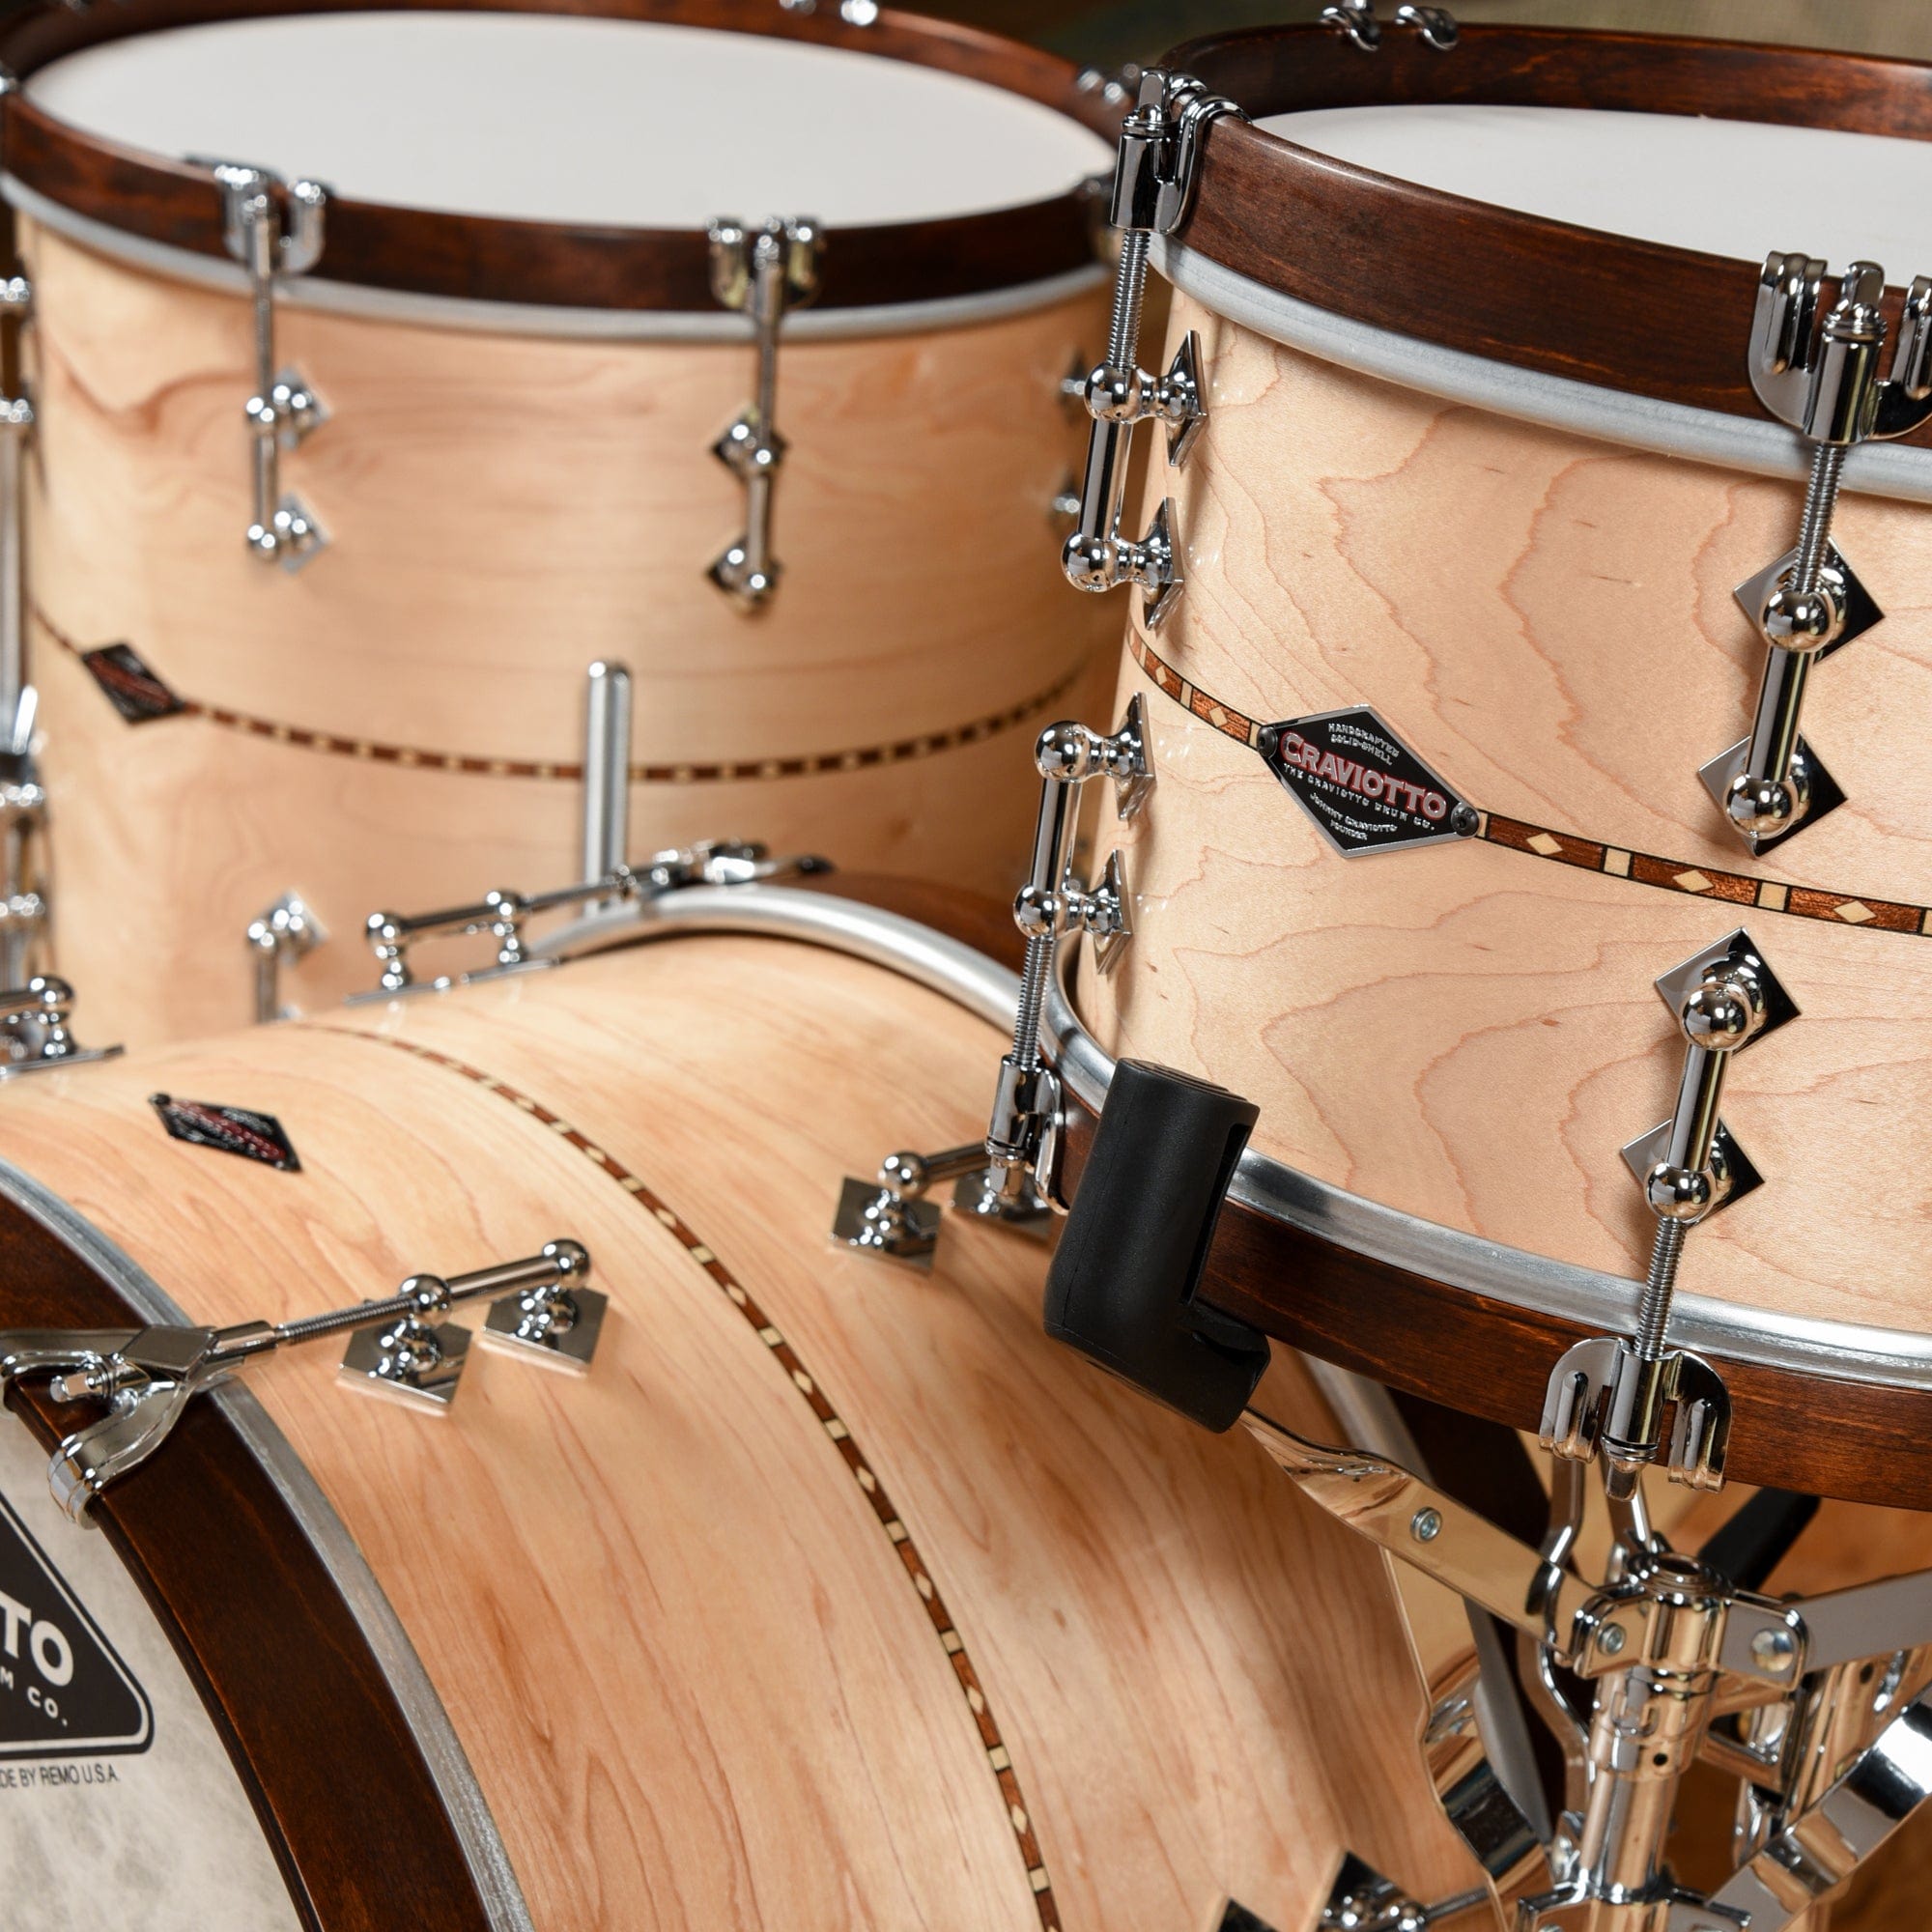 Craviotto 12/14/20 3pc. Solid Maple Super Swing Drum Kit w/Walnut Inlay & Brown Stained Wood Hoops Drums and Percussion / Acoustic Drums / Full Acoustic Kits